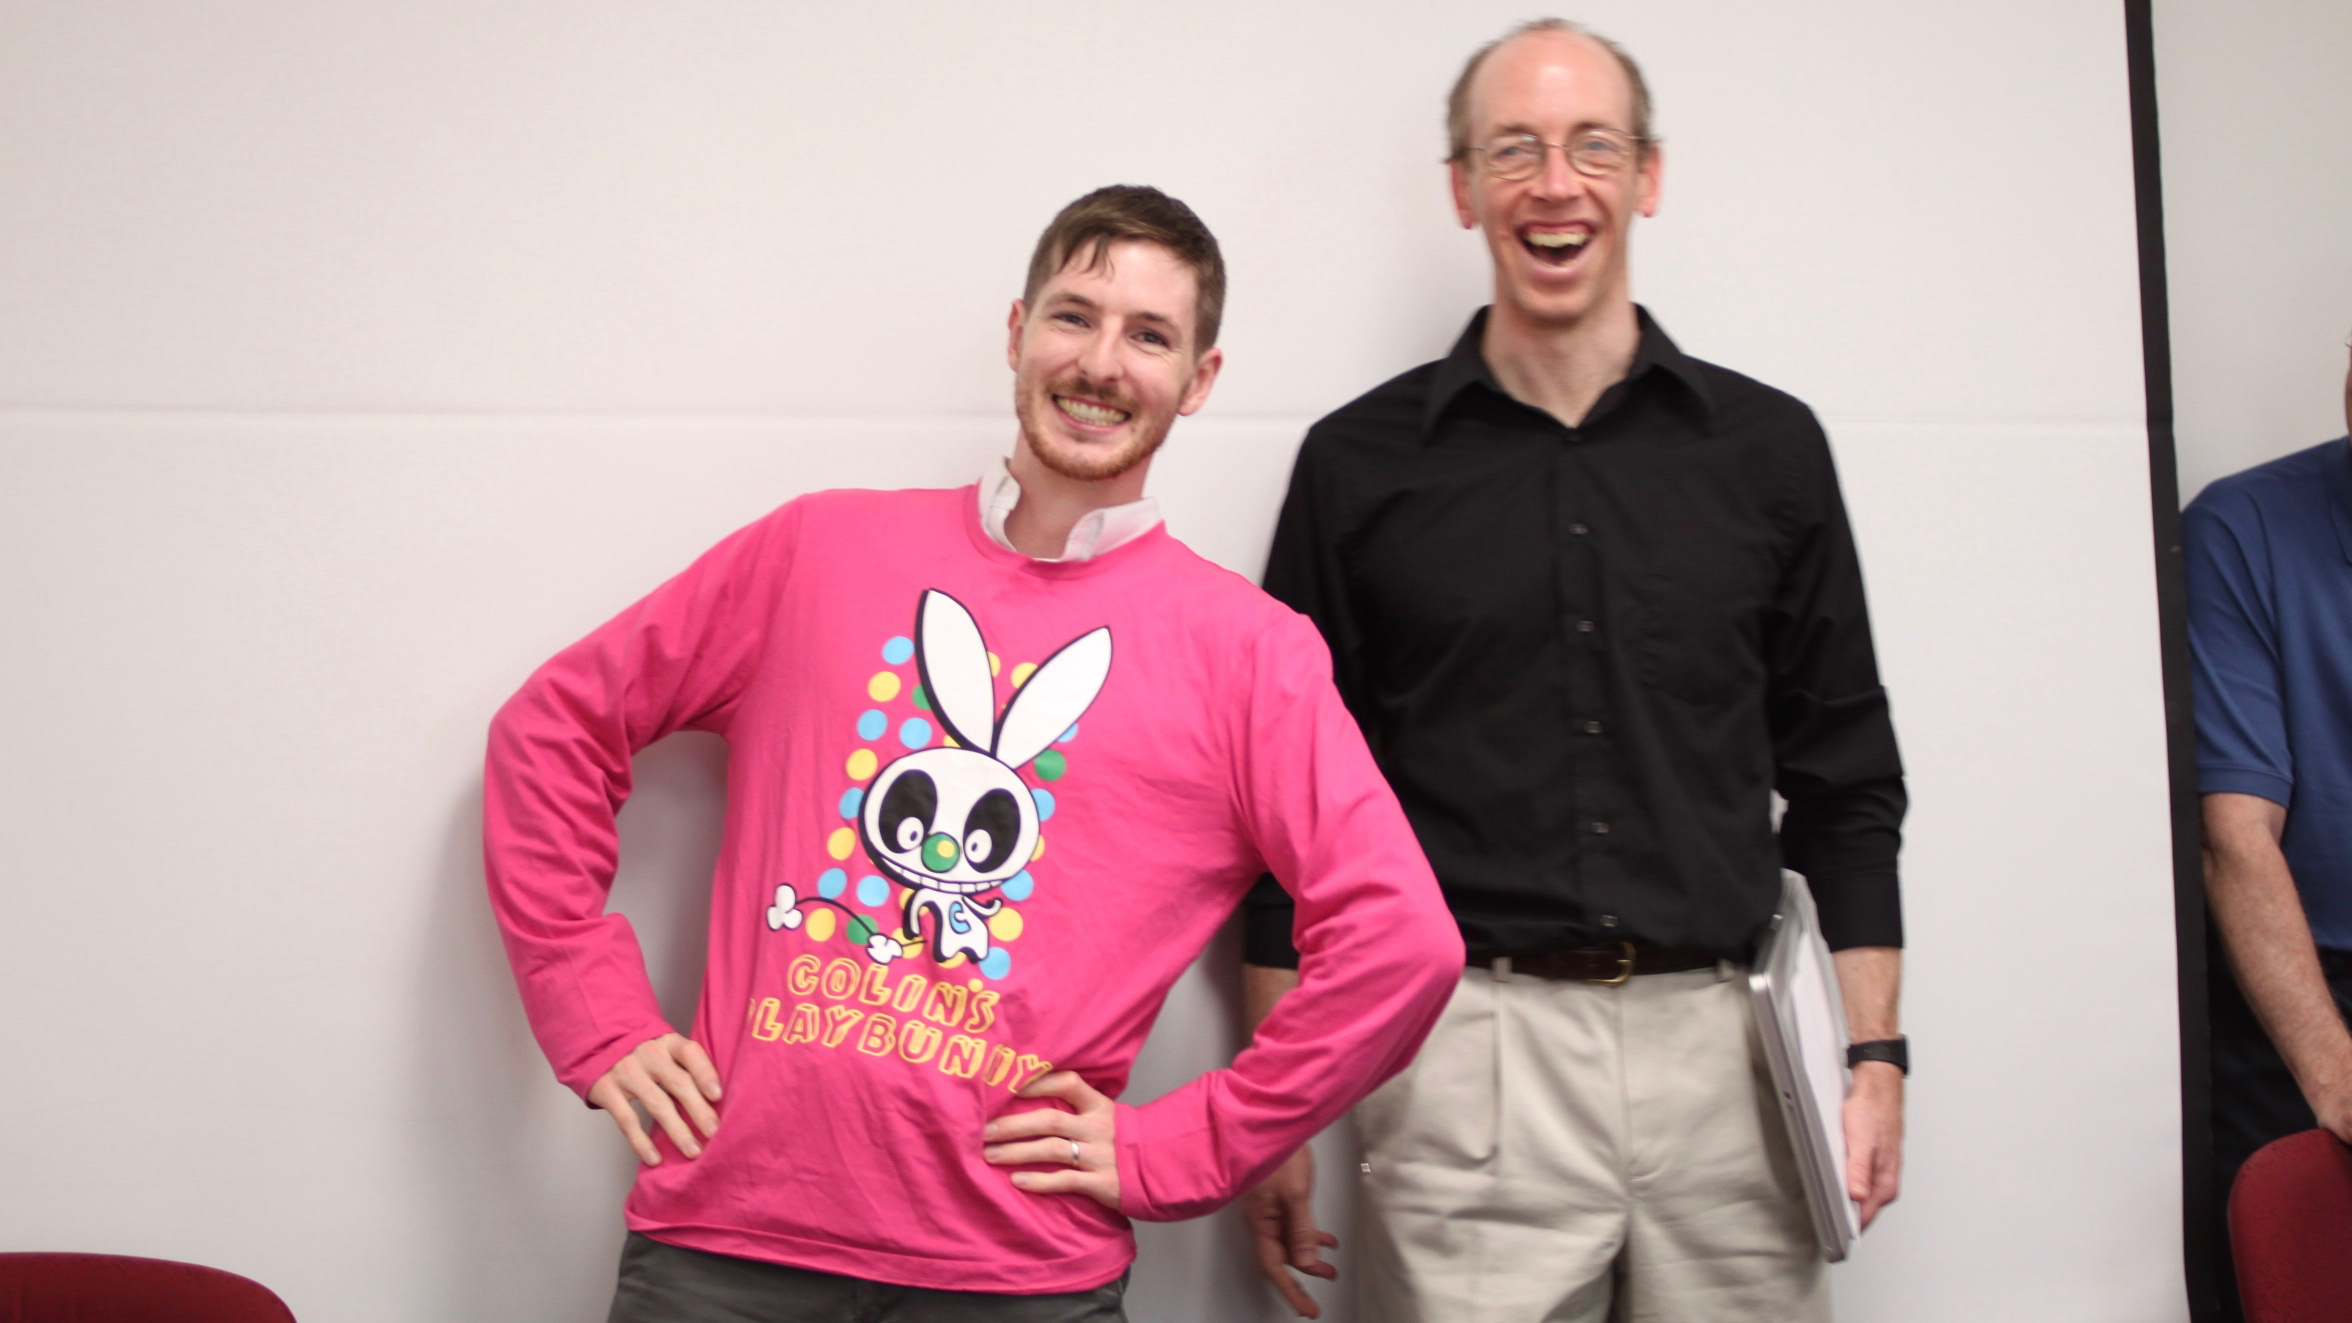 PhD student Brian Dillon in a pink long-sleeve jersey that says "Colin's Plaything", arms akimbo and smiling comically, standing next to his advisor Colin Phillips, who is erupting with laughter.